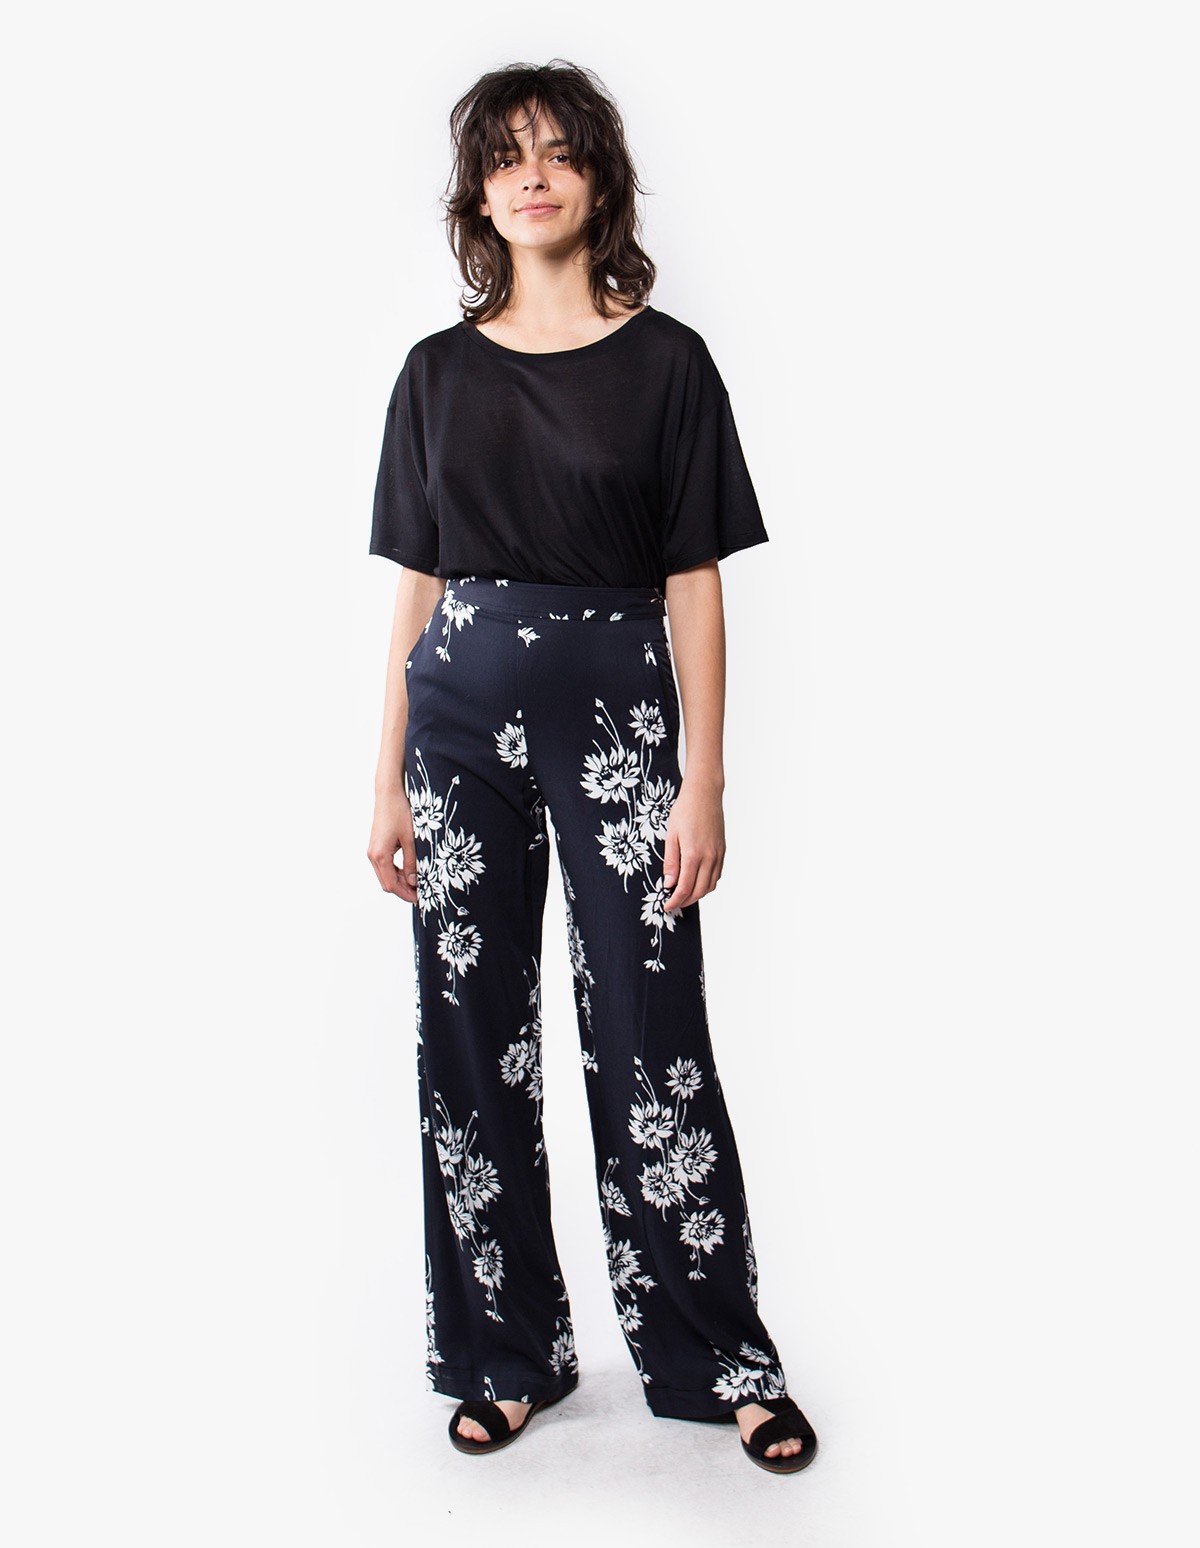 McQ Alexander McQueen Flaming Delilah Trousers  in Black